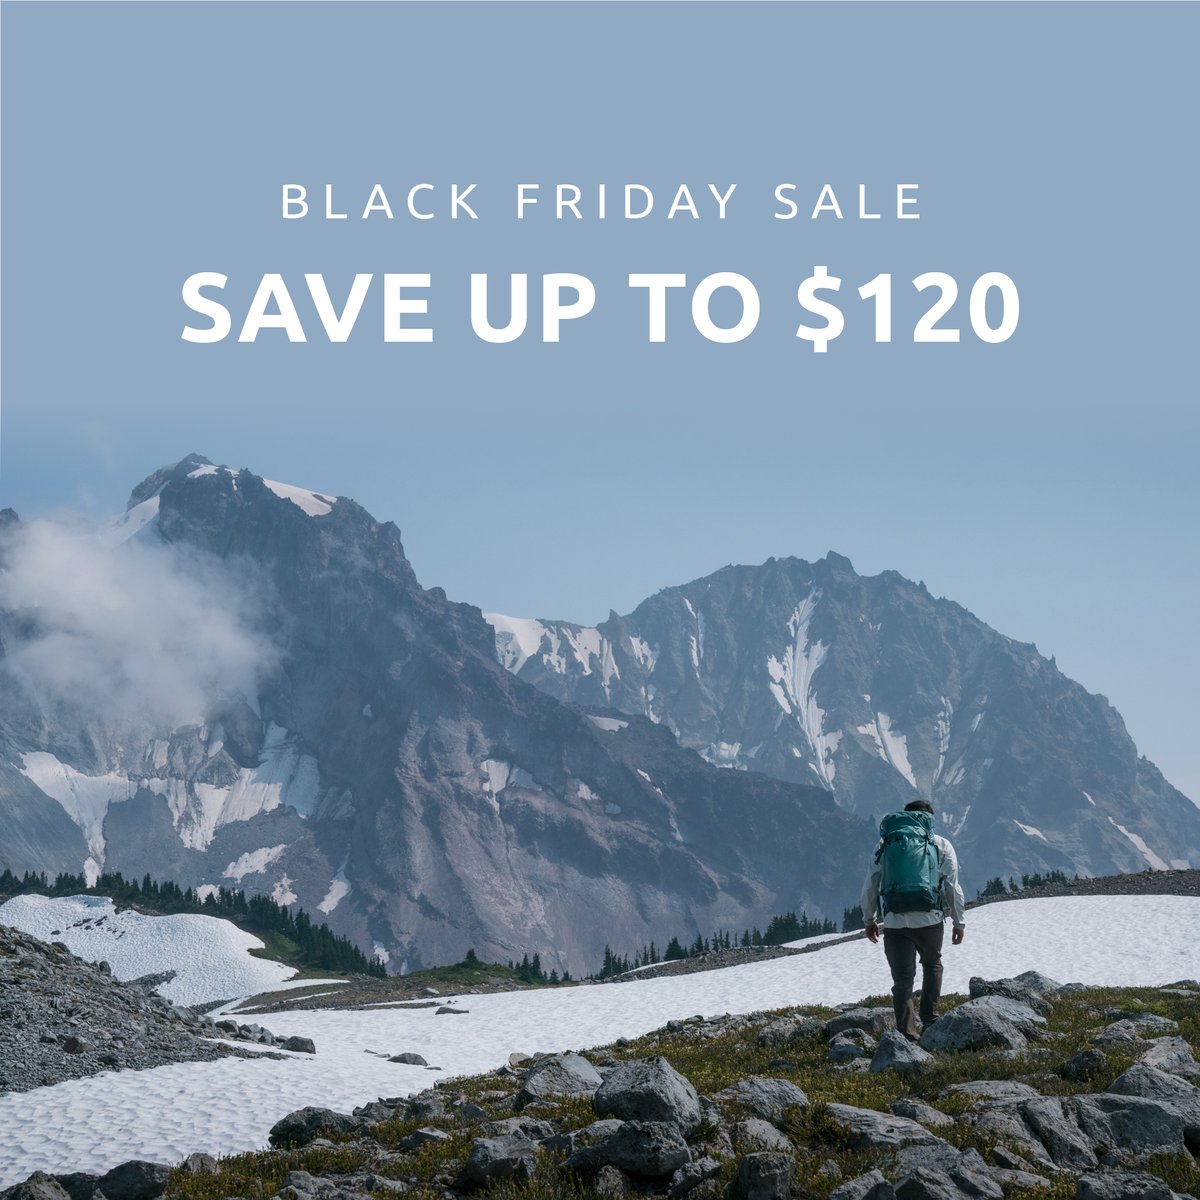 The holidays are upon us and to help celebrate we've got Black Friday sales up to $120 off on our Starter Kits, Backpacks, and Carry-On Roller. Offer valid between now until December 6th. Don't miss out! 😎 Shop the sale here: bit.ly/33u1s2B